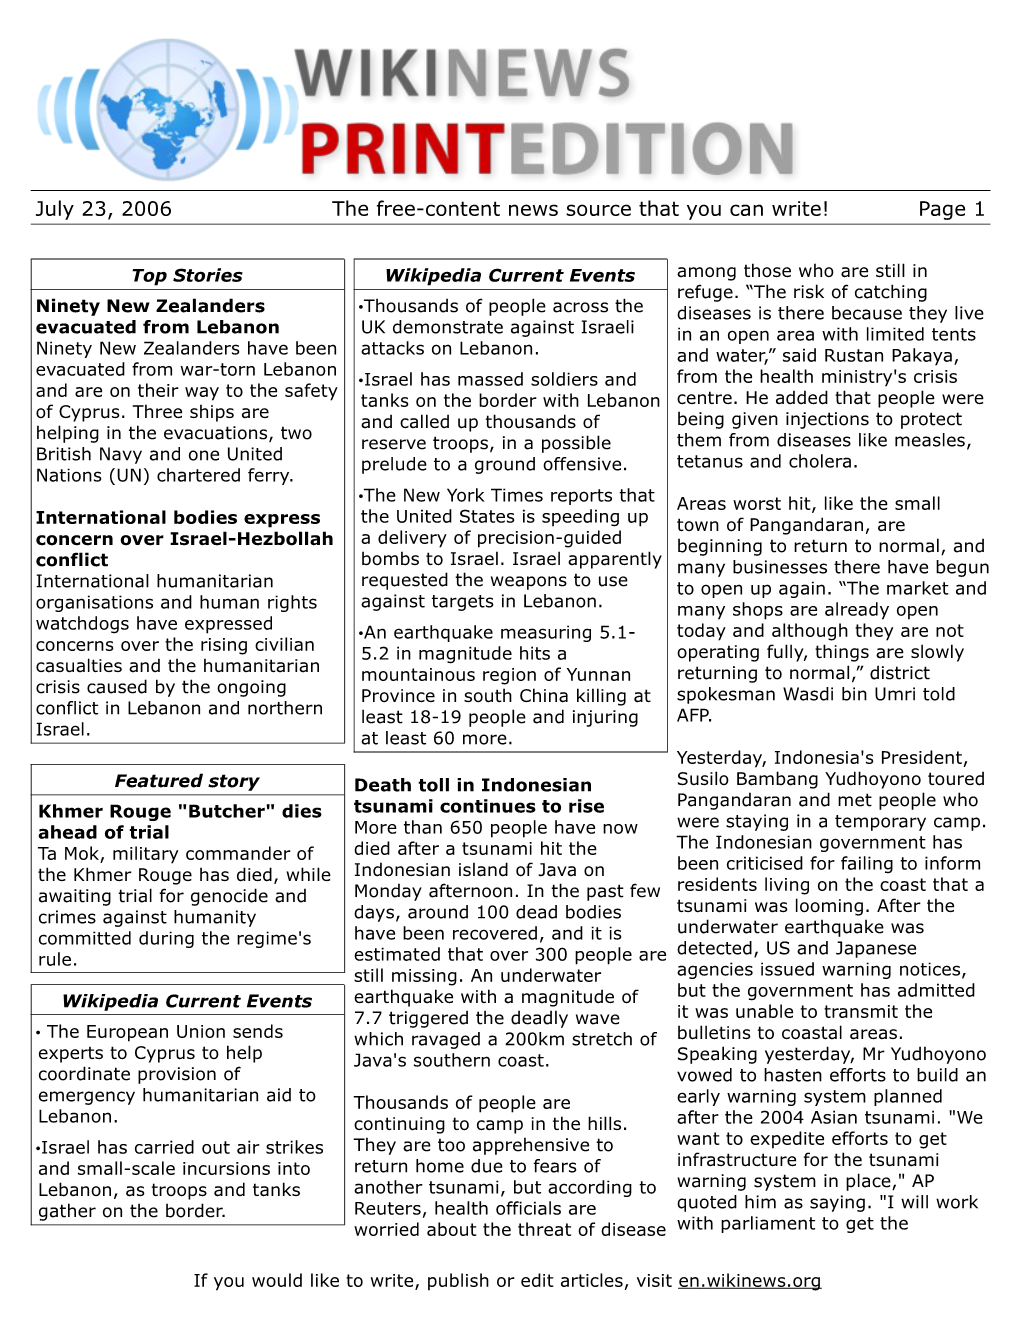 July 23, 2006 the Free-Content News Source That You Can Write! Page 1